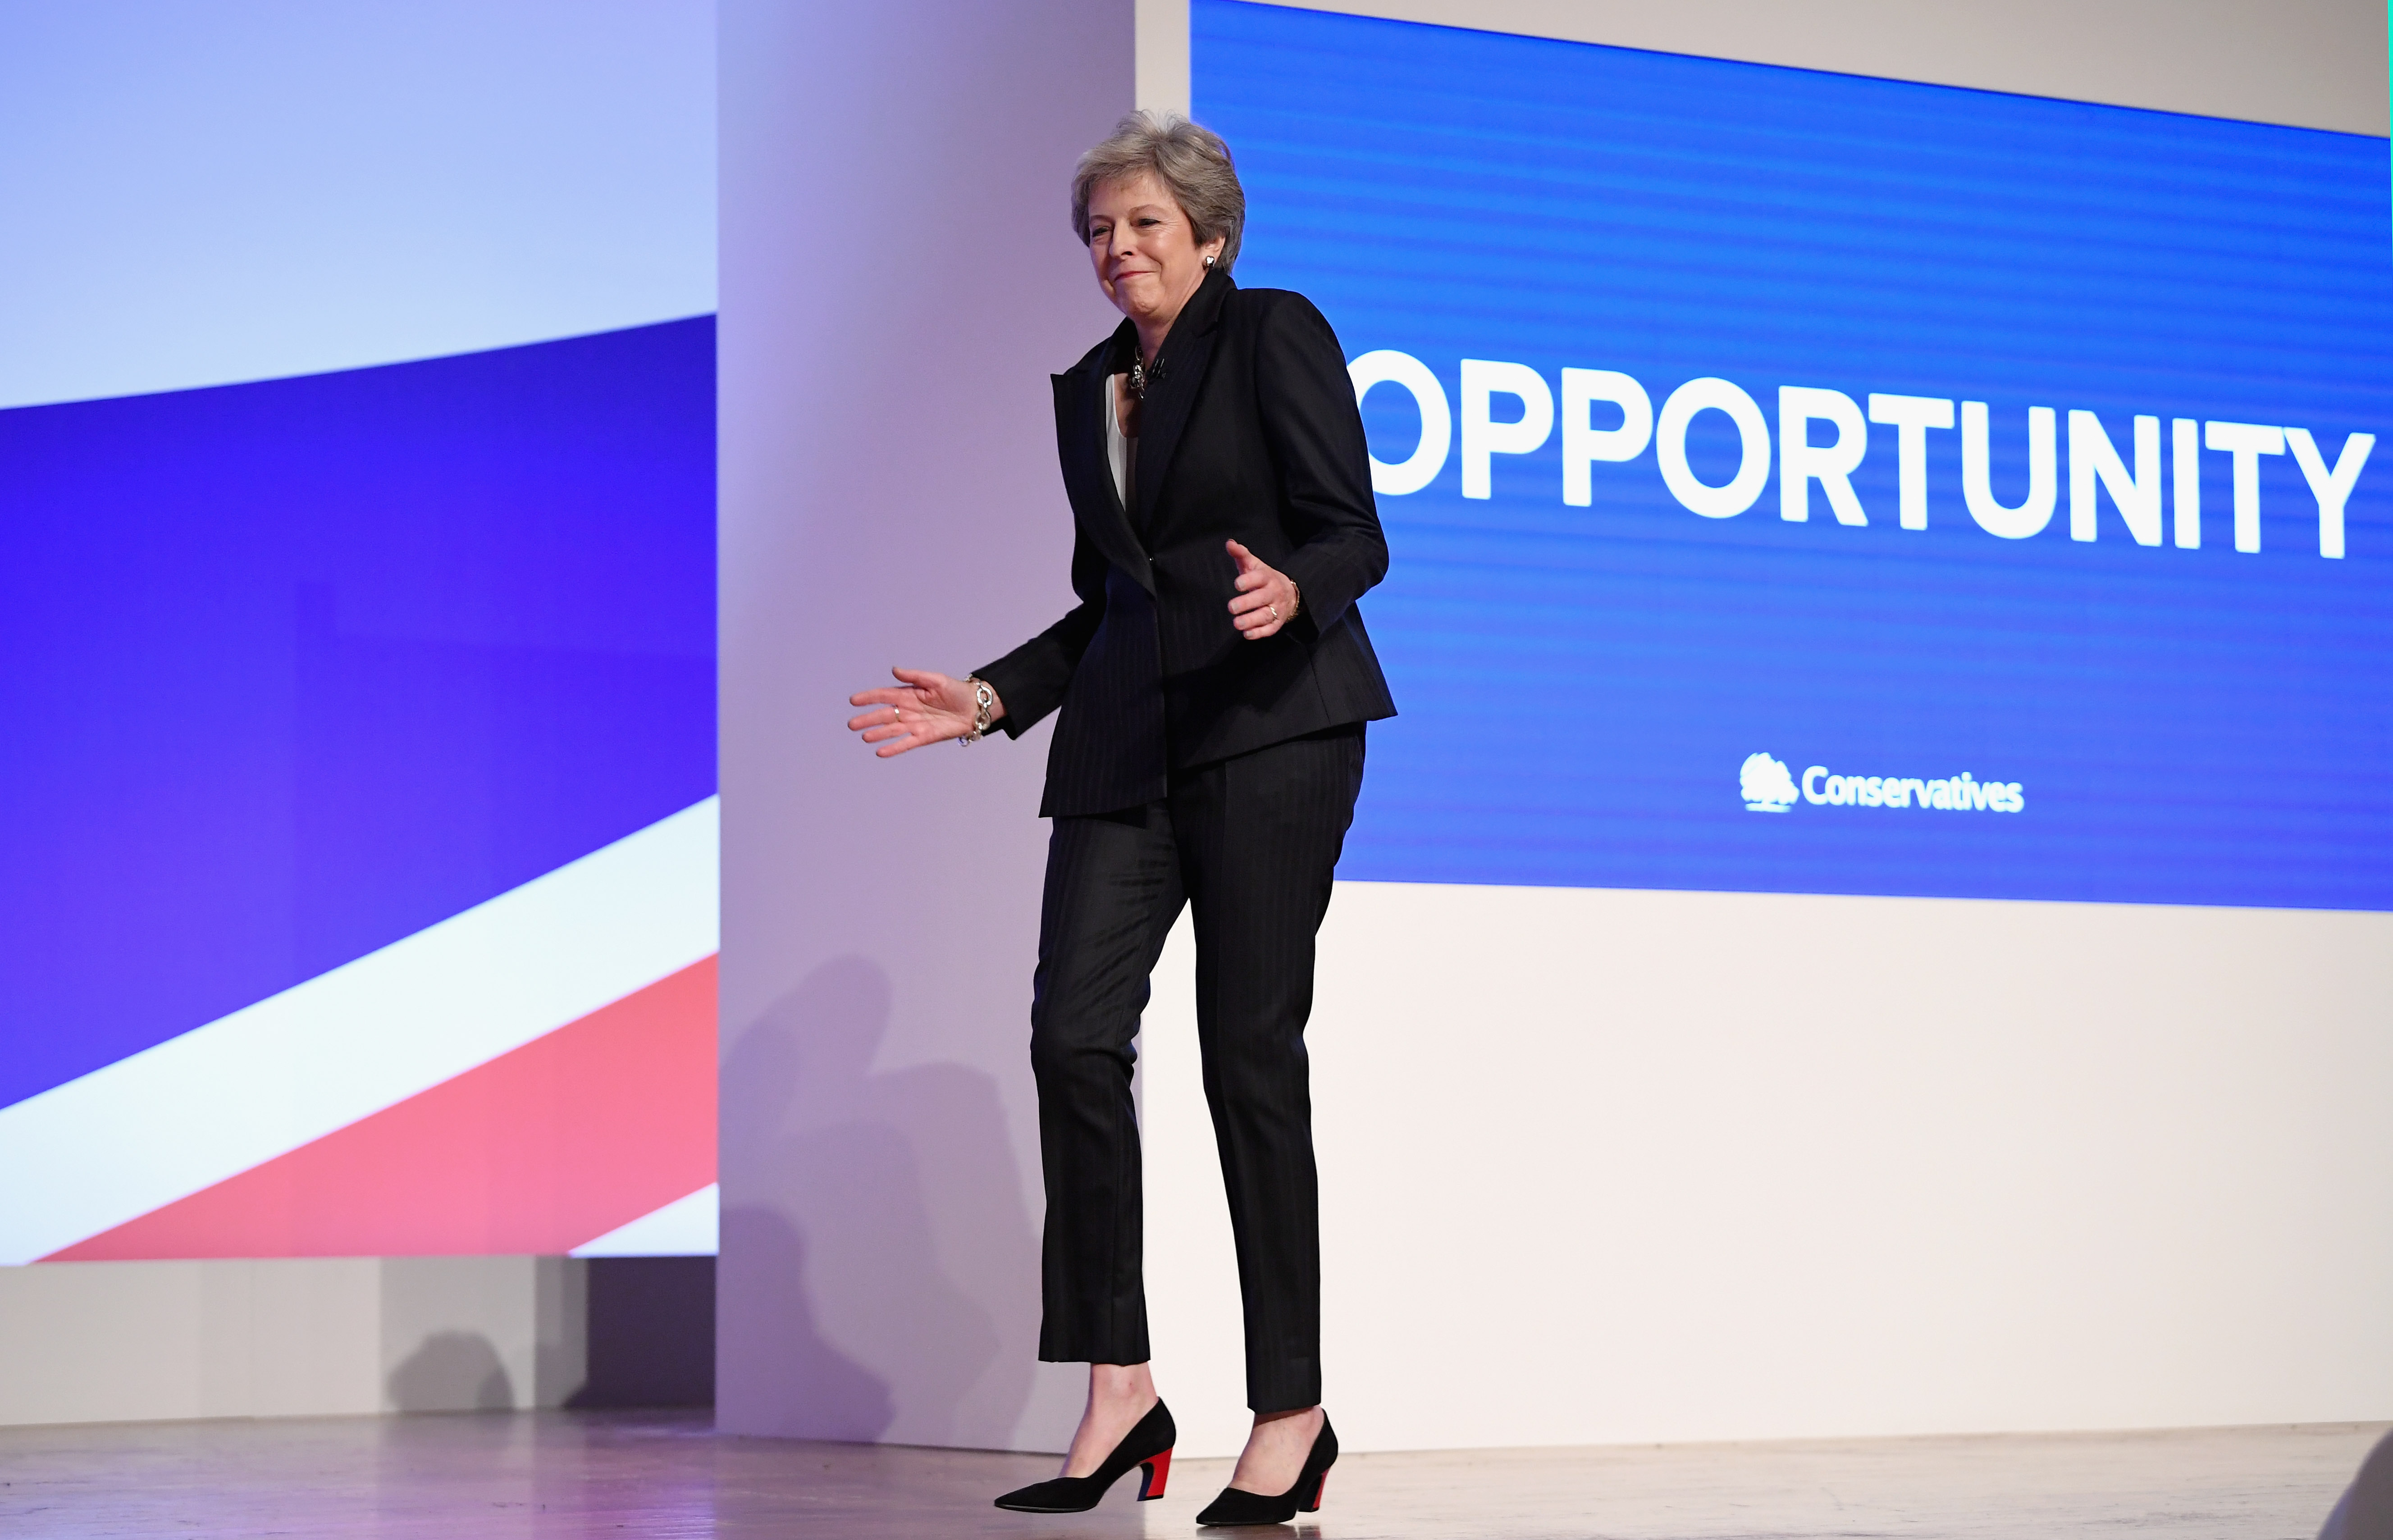 BIRMINGHAM, ENGLAND - OCTOBER 03:  British Prime Minister Theresa May dances as she walks out onto the stage to deliver her leader's speech during the final day of the Conservative Party Conference at The International Convention Centre on October 3, 2018 in Birmingham, England. Theresa May delivered her leader's speech to the 2018 Conservative Party Conference today. Appealing to the "decent, moderate and patriotic", she stated that the Conservative Party is for everyone who is willing to "work hard and do their best". This year's conference took place six months before the UK is due to leave the European Union, with divisions on how Brexit should be implemented apparent throughout.  (Photo by Jeff J Mitchell/Getty Images)